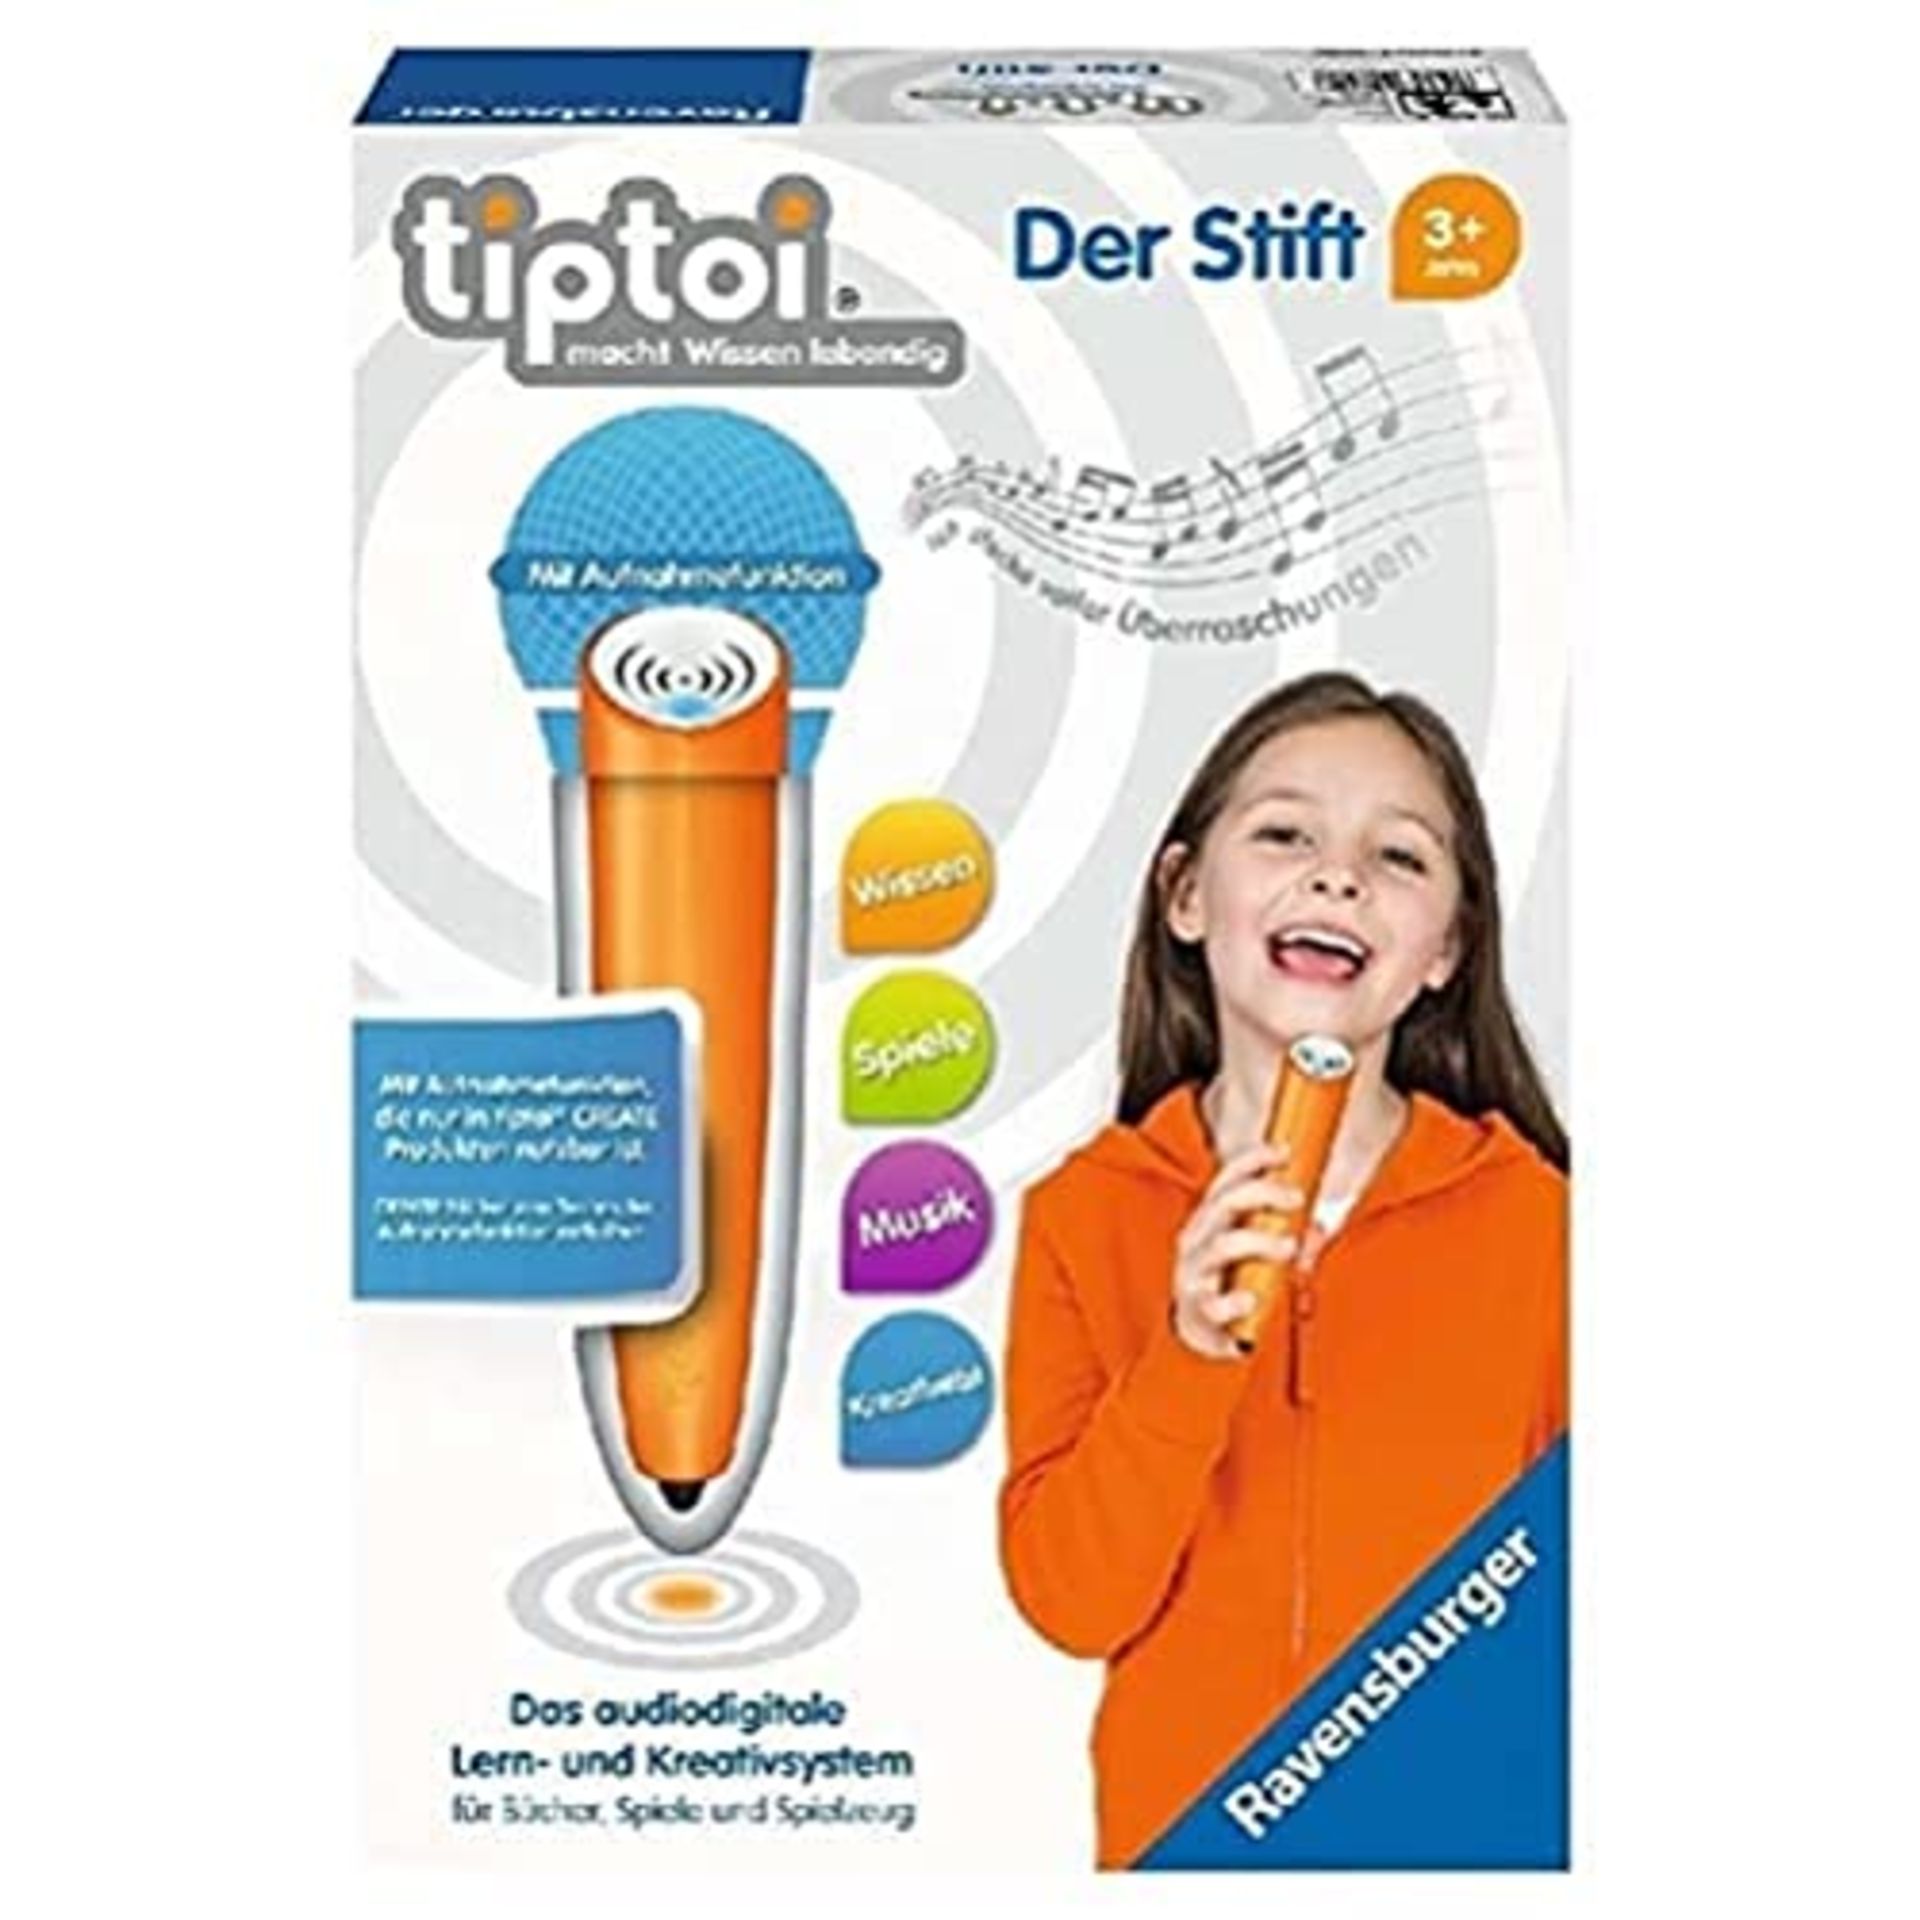 tiptoi® The pen: the audio-digital learning and creative system